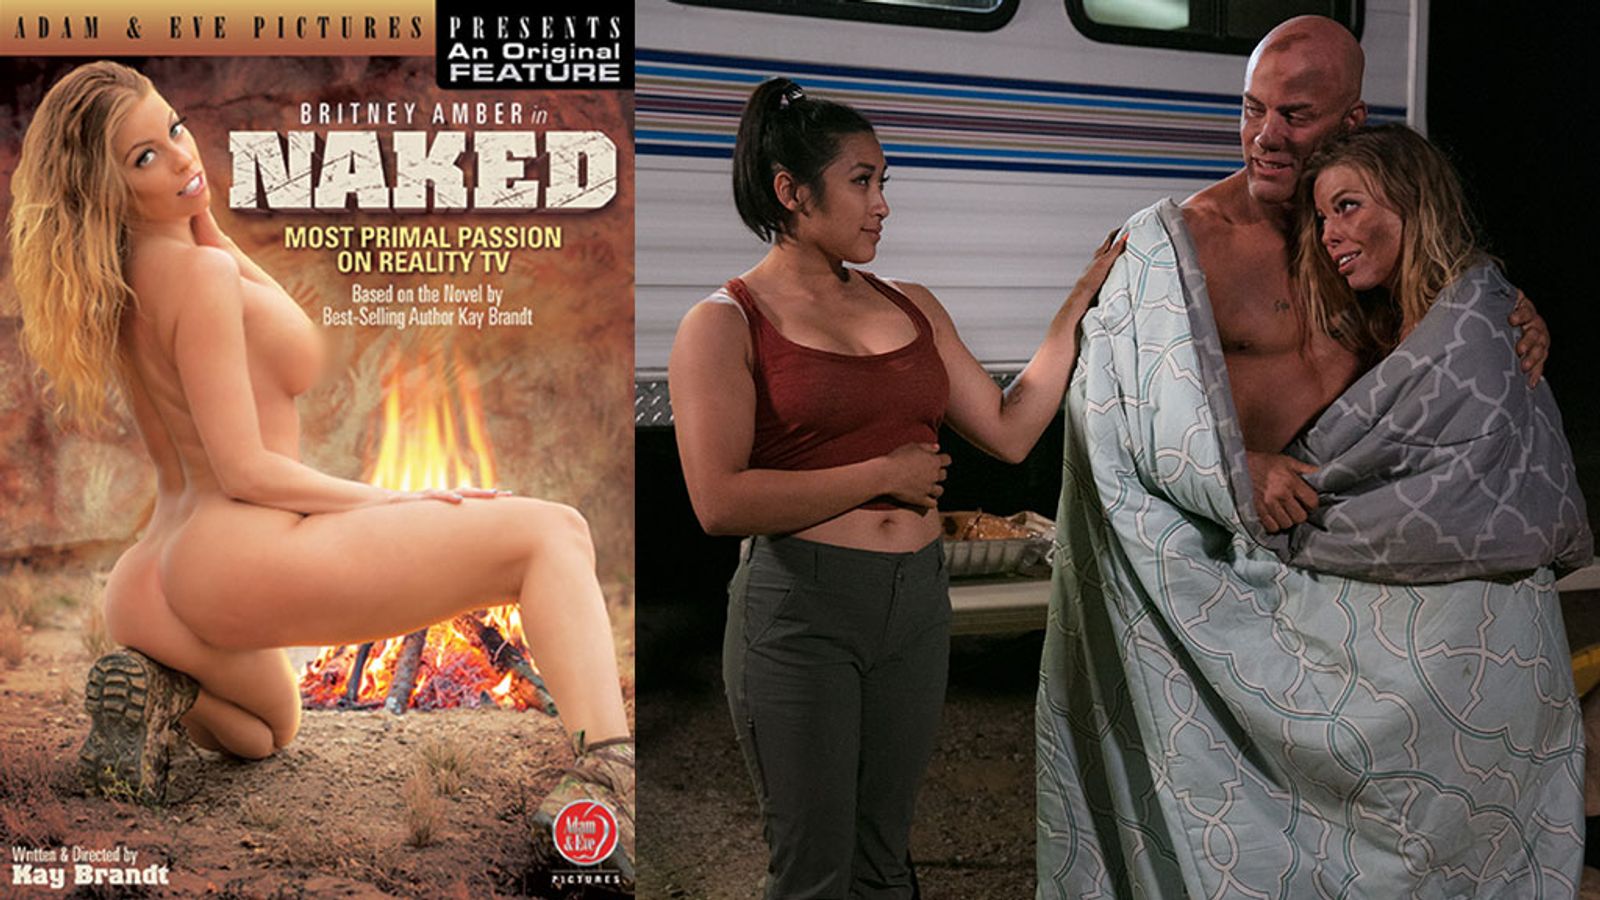 Reality Show Ain't Like Real Life in Adam & Eve’s 'Naked'